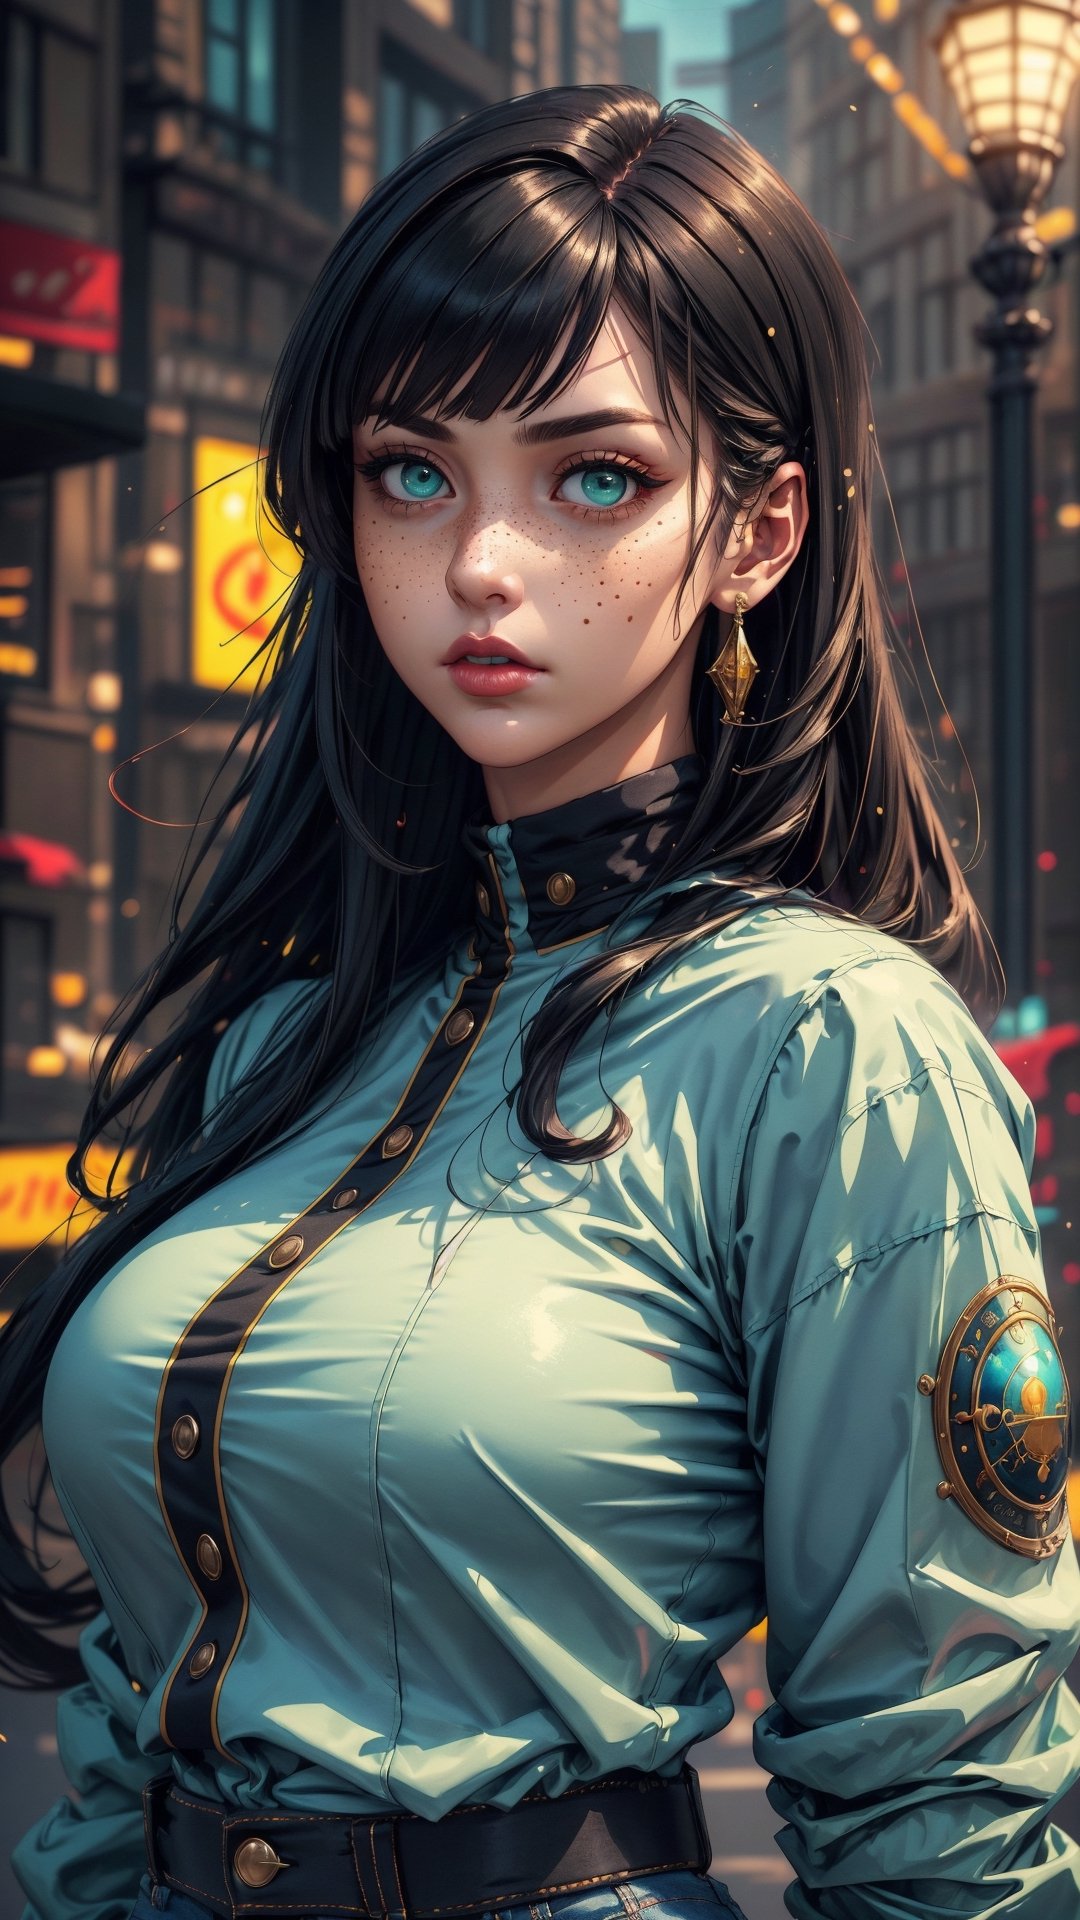 (4k), (masterpiece), (best quality), (extremely complex), (realistic), (sharp focus), (cinematic lighting), (extremely detailed), (epic), A close-up portrait of a woman chubby, serious look, deep look, incredibly detailed hand, long black hair, bangs, mint green eyes, freckles on face, white shirt with jacket on top, black jeans, curvy body, full body, detailed face, perfect eyes, Detailed hands, Mix of fantasy and realism. elements, vibrant manga, uhd image, vibrant illustrations, the background is planet earth